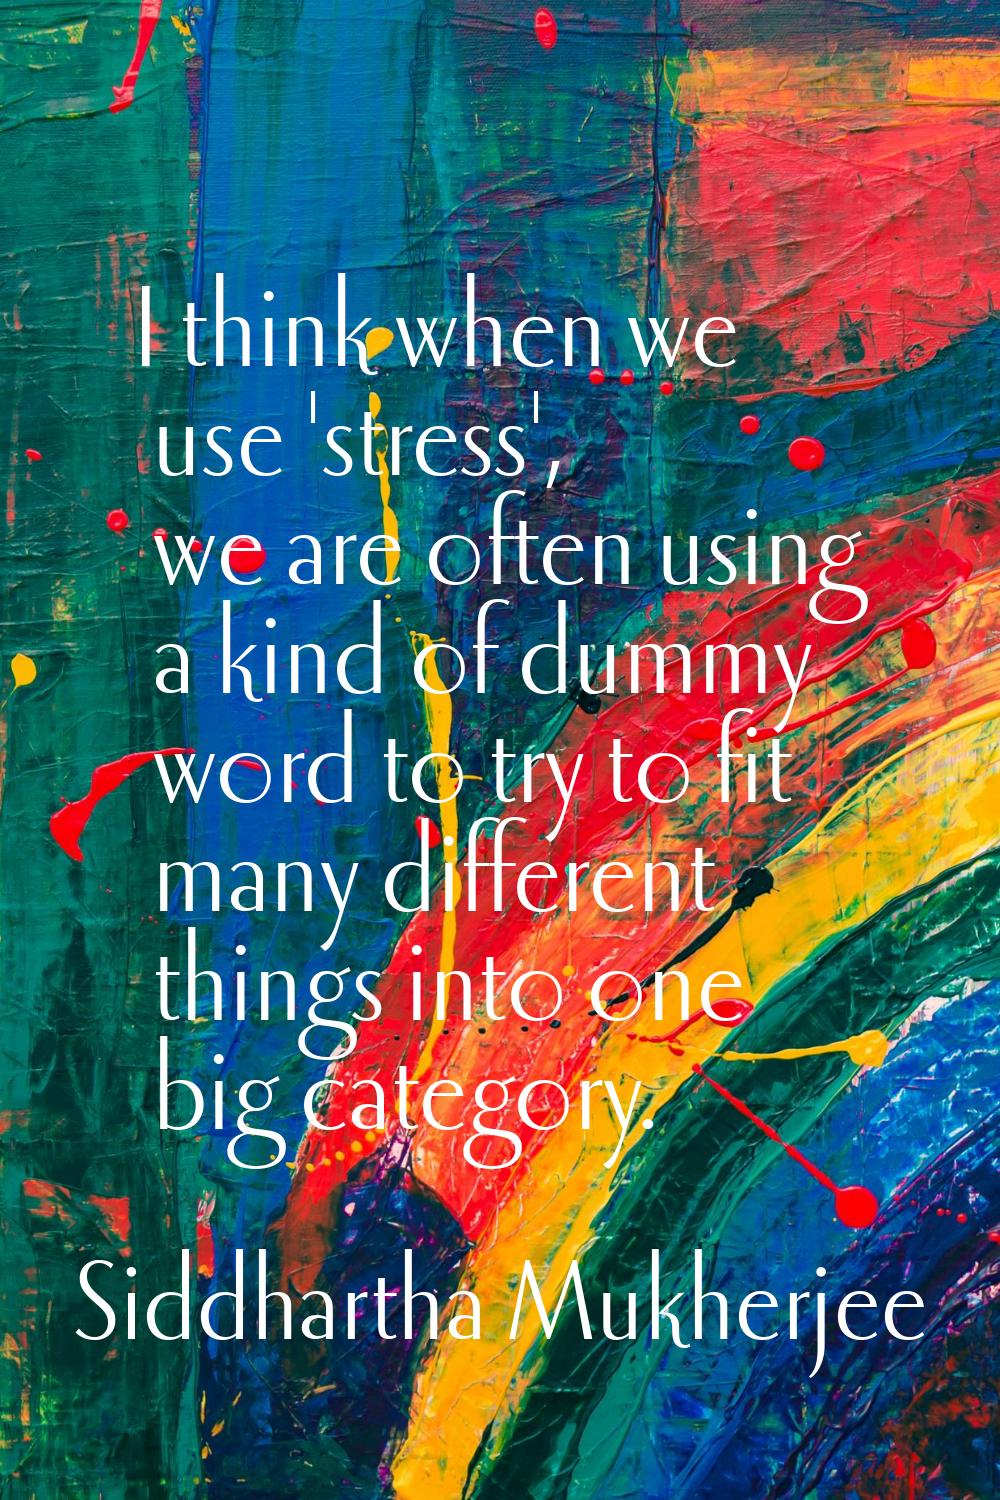 I think when we use 'stress', we are often using a kind of dummy word to try to fit many different 